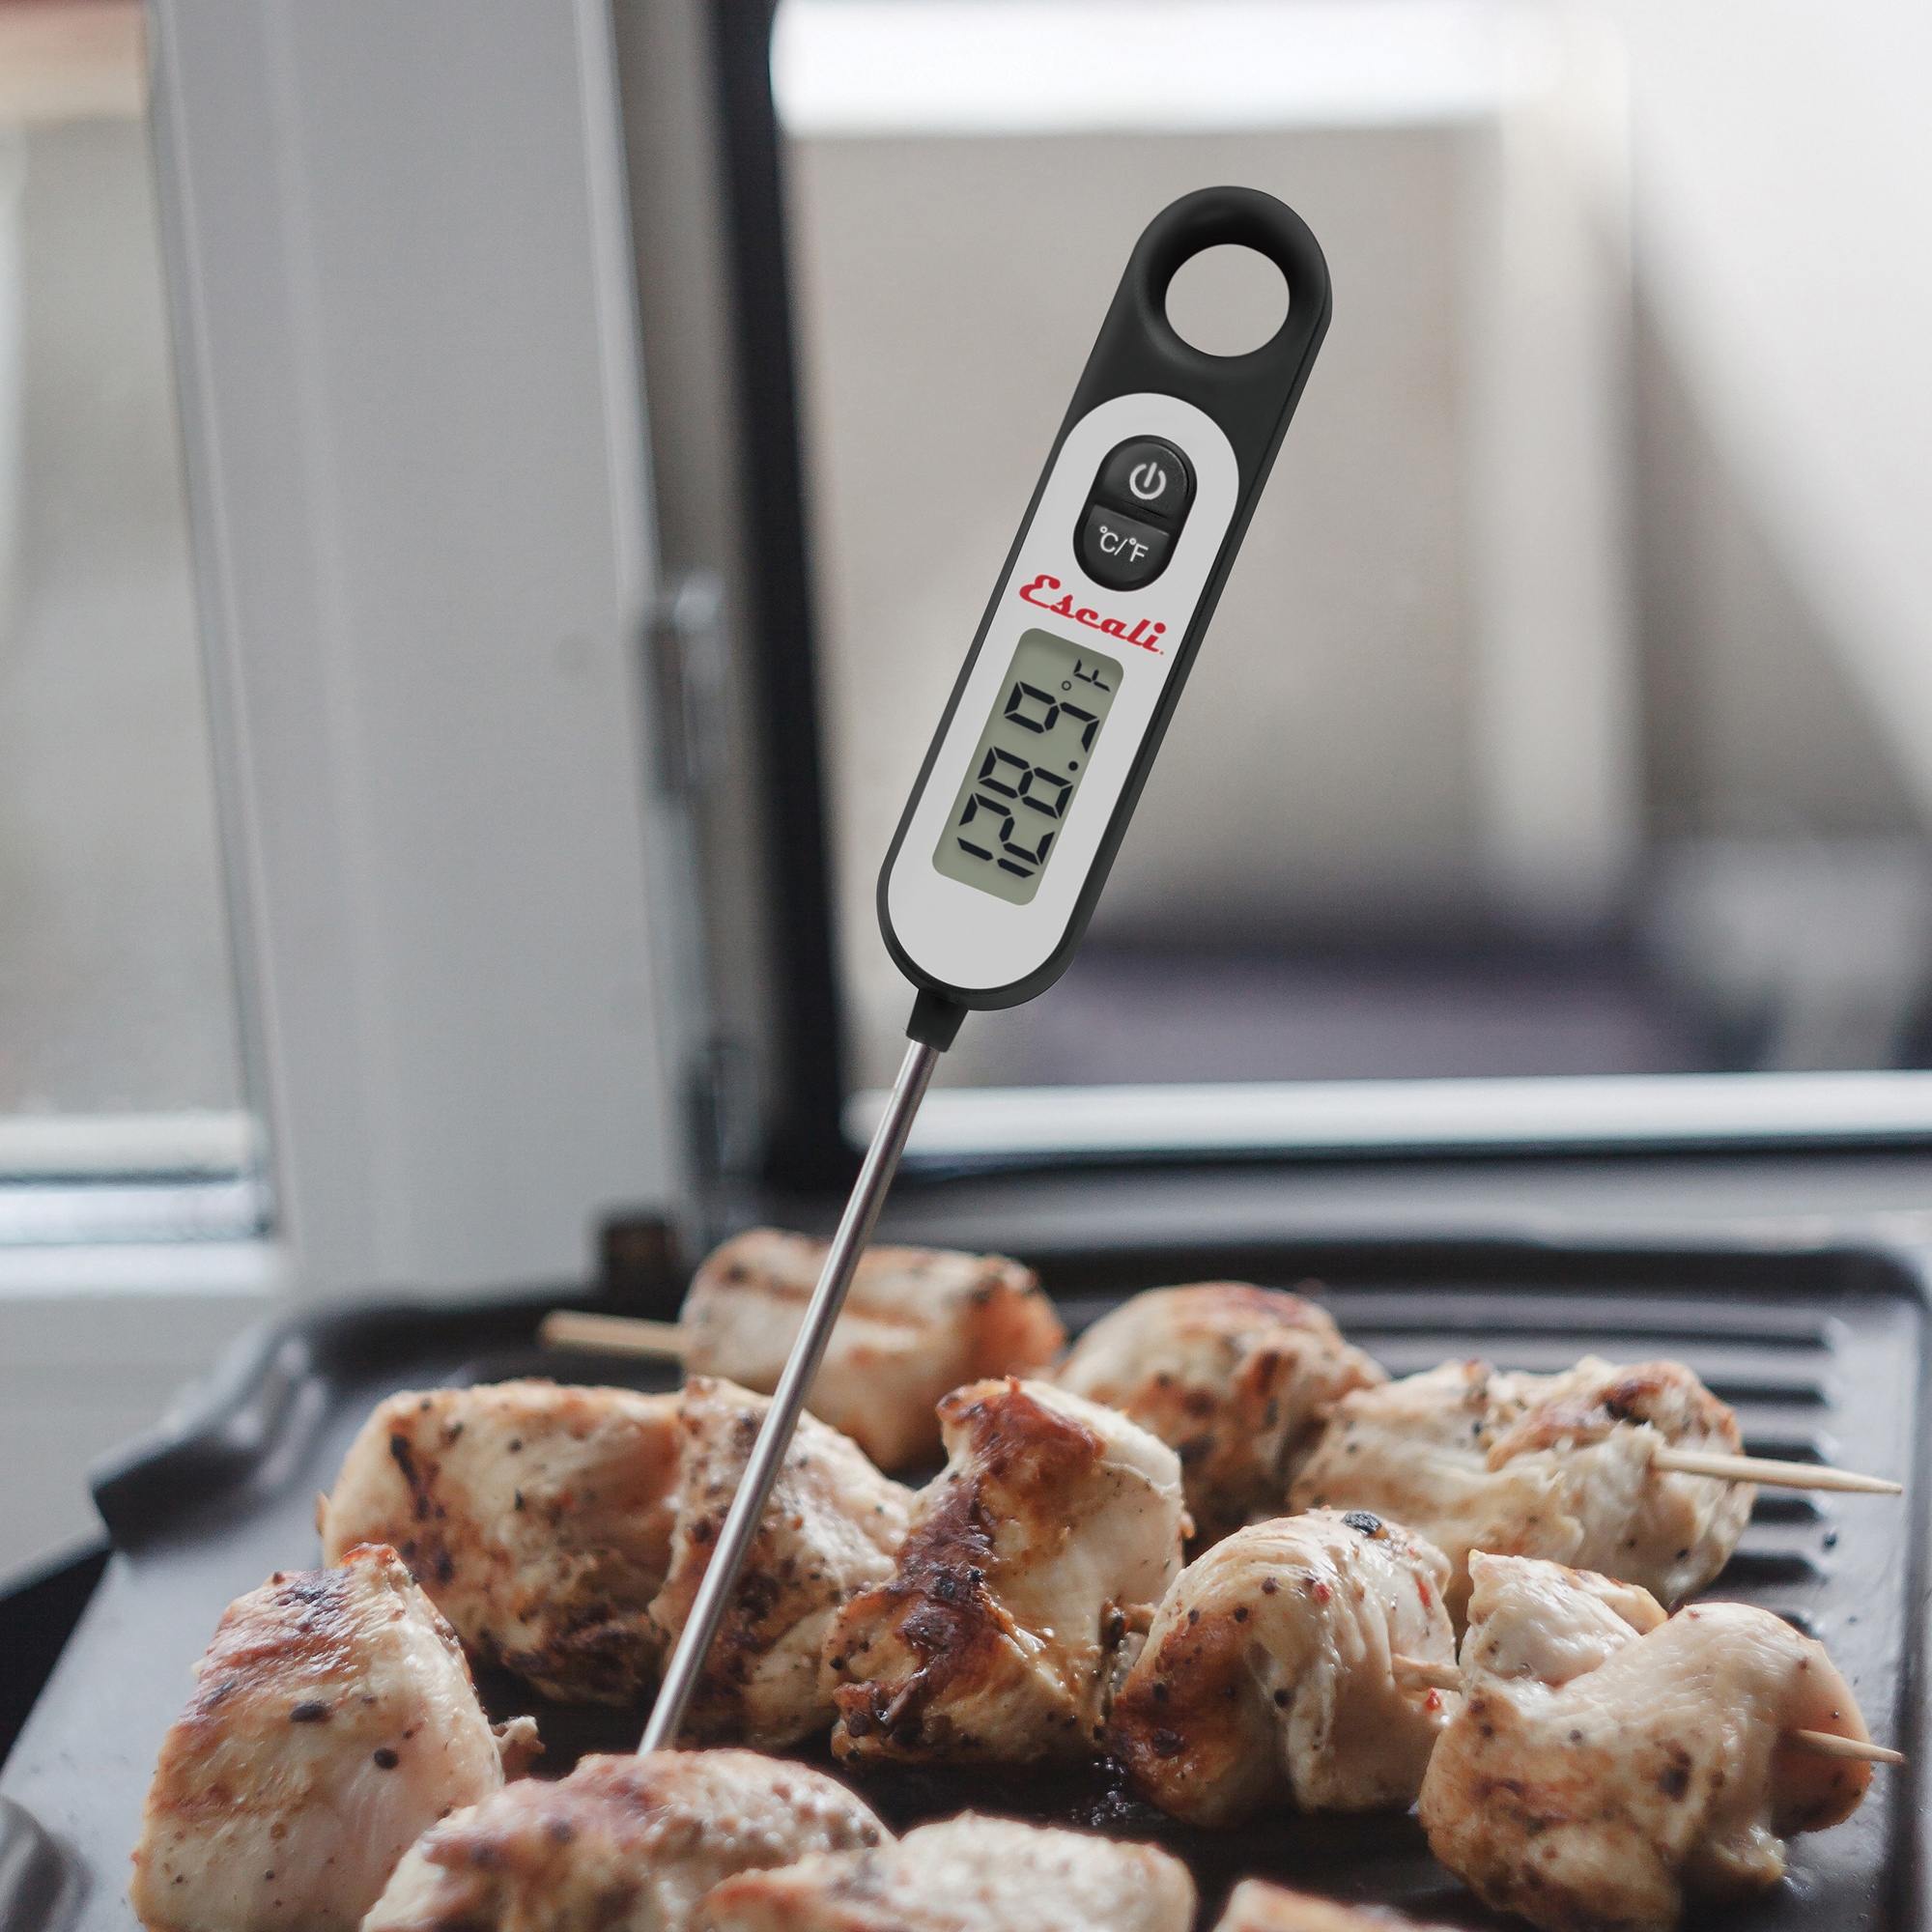 Escali Extra-Large Round Grill Thermometer - Clear Dial, Ideal Grill &  Searing Temperature Zones - For Direct Use on Cooking Surfaces in the Grill  Thermometers department at